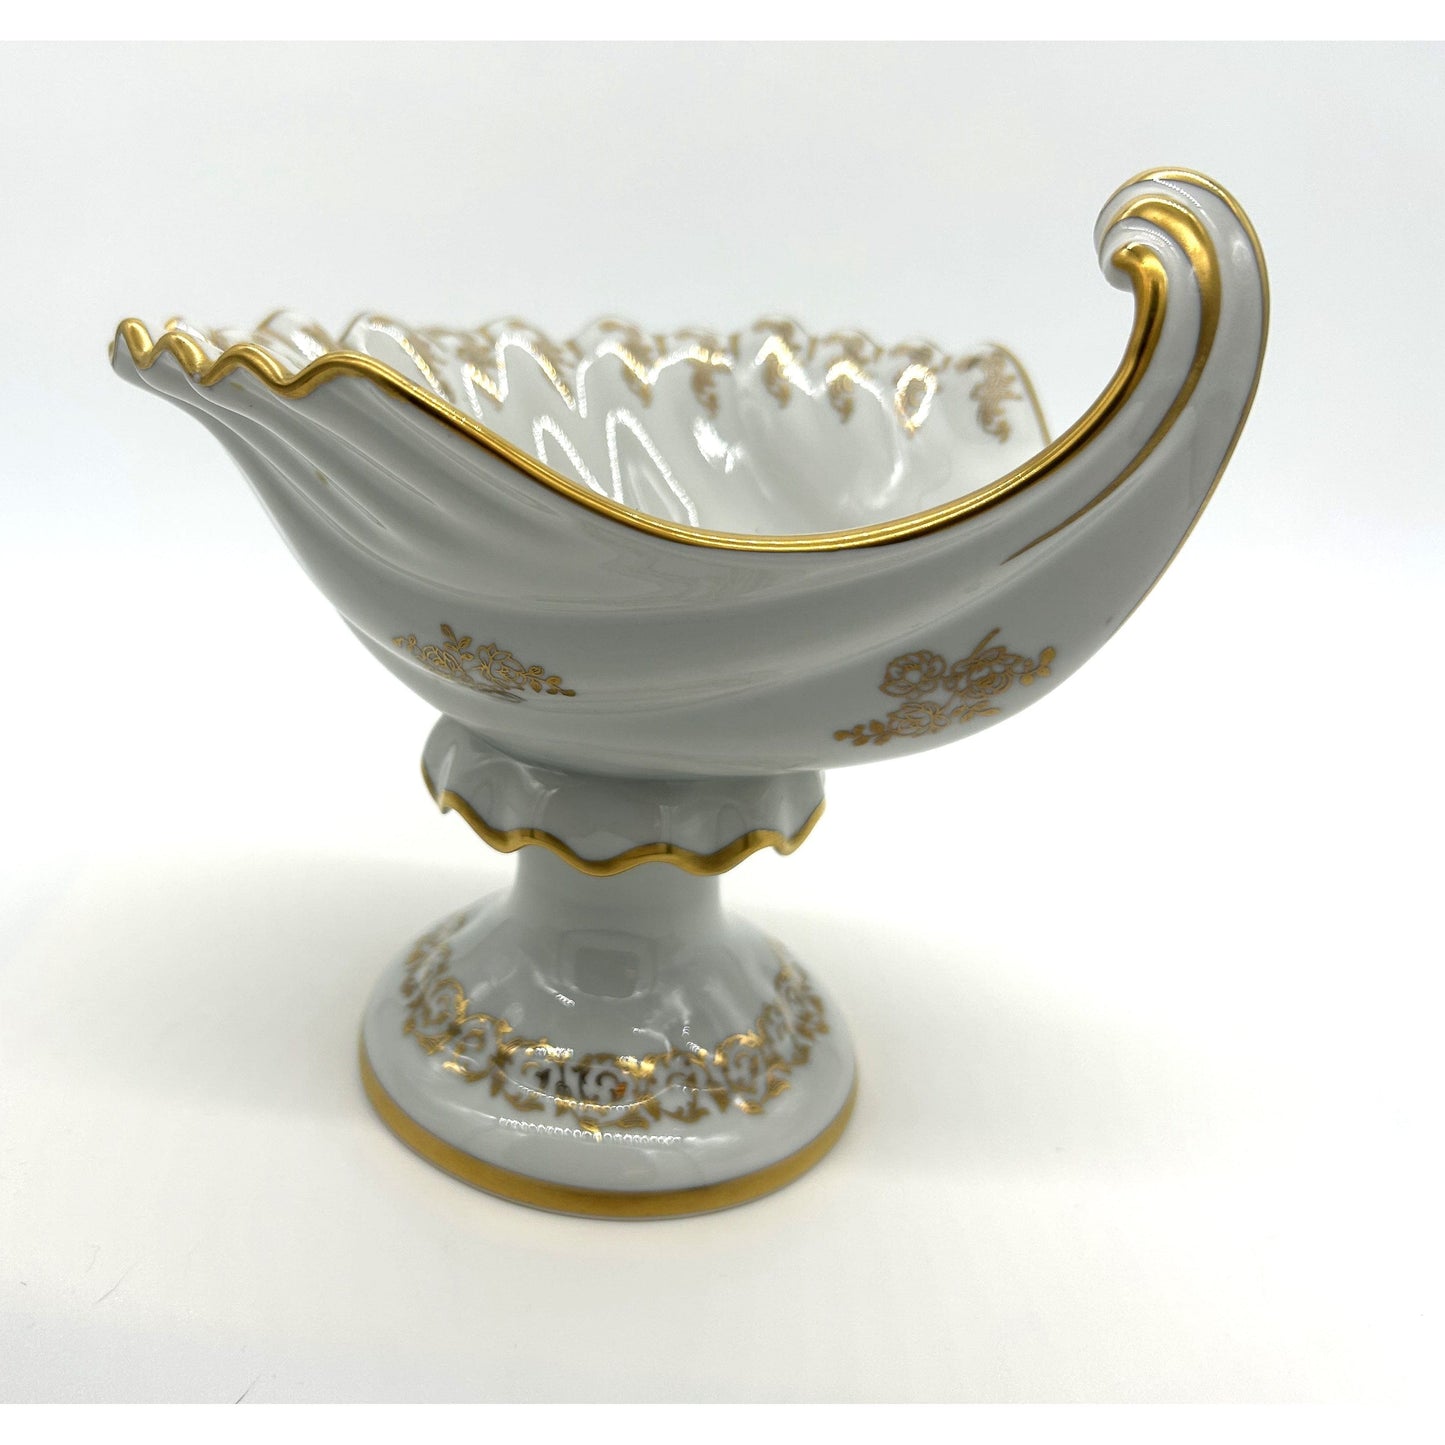 BOWL Fluted Pedestal Gold Trimmed small flower accents - Vintage Rare Porcelain Oyster Candy bowl dish